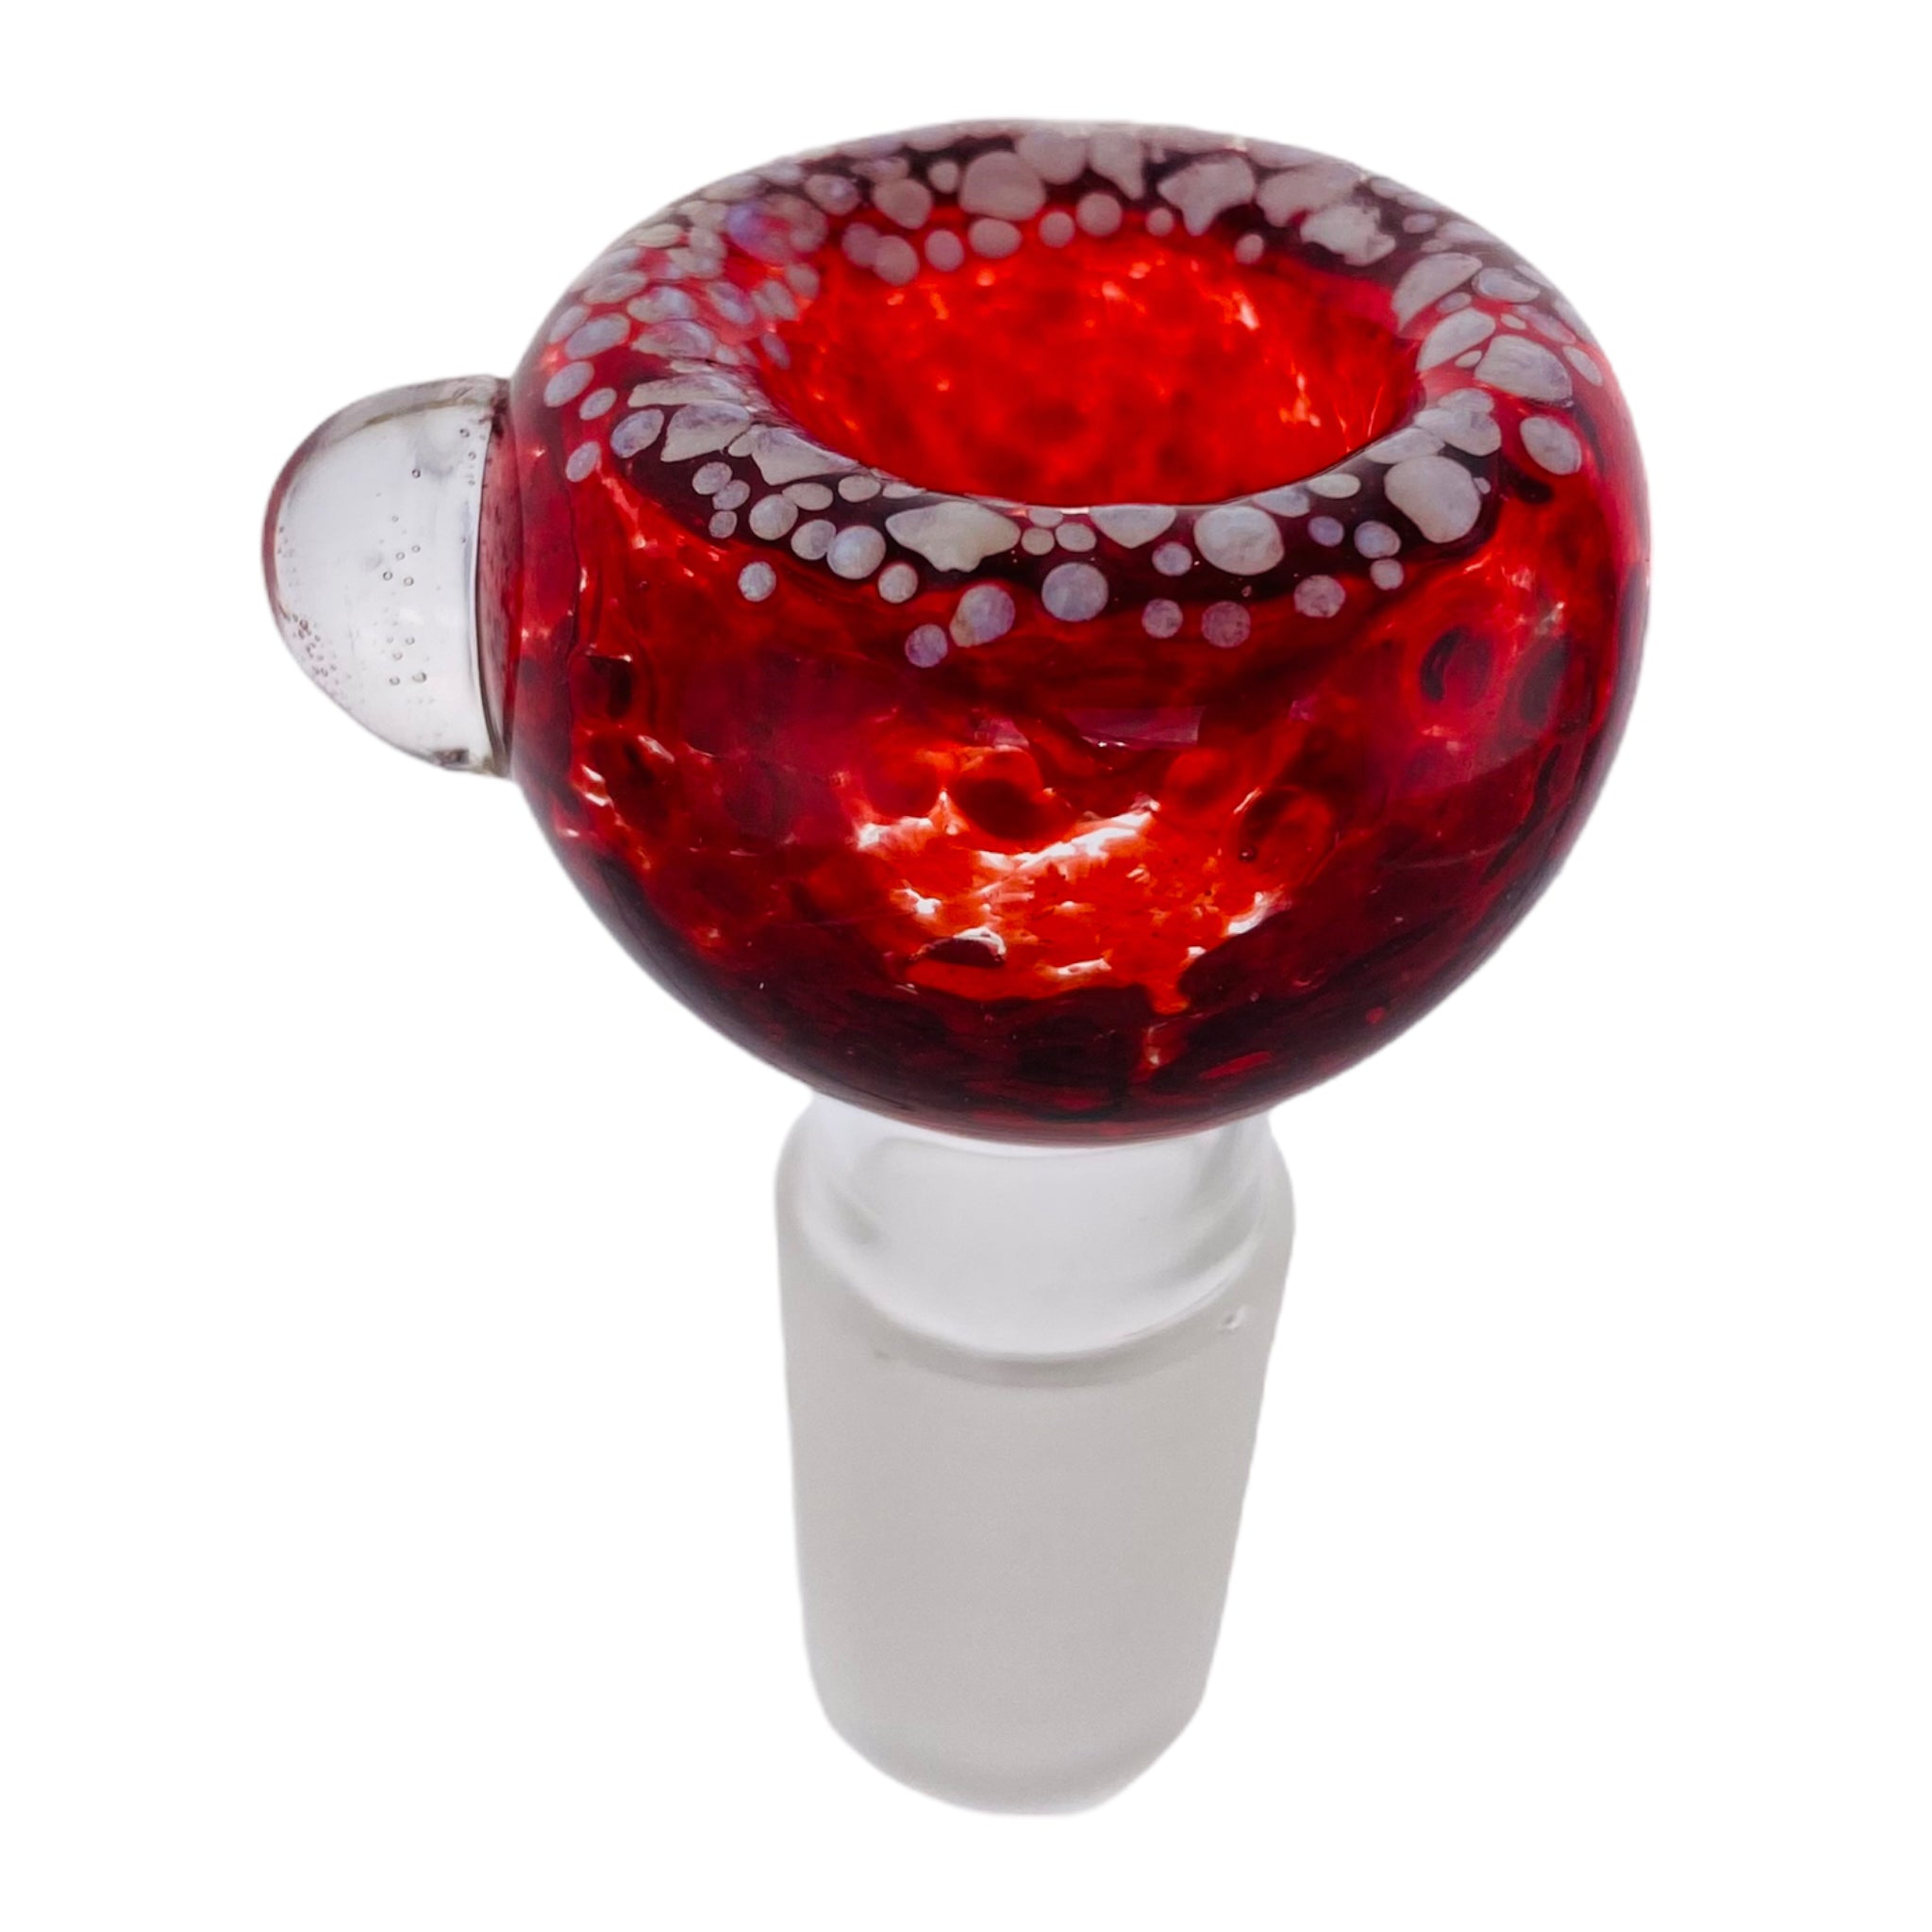 18mm Flower Bowl - Bubble With Frosted Rim Bong Bowl Piece - Red